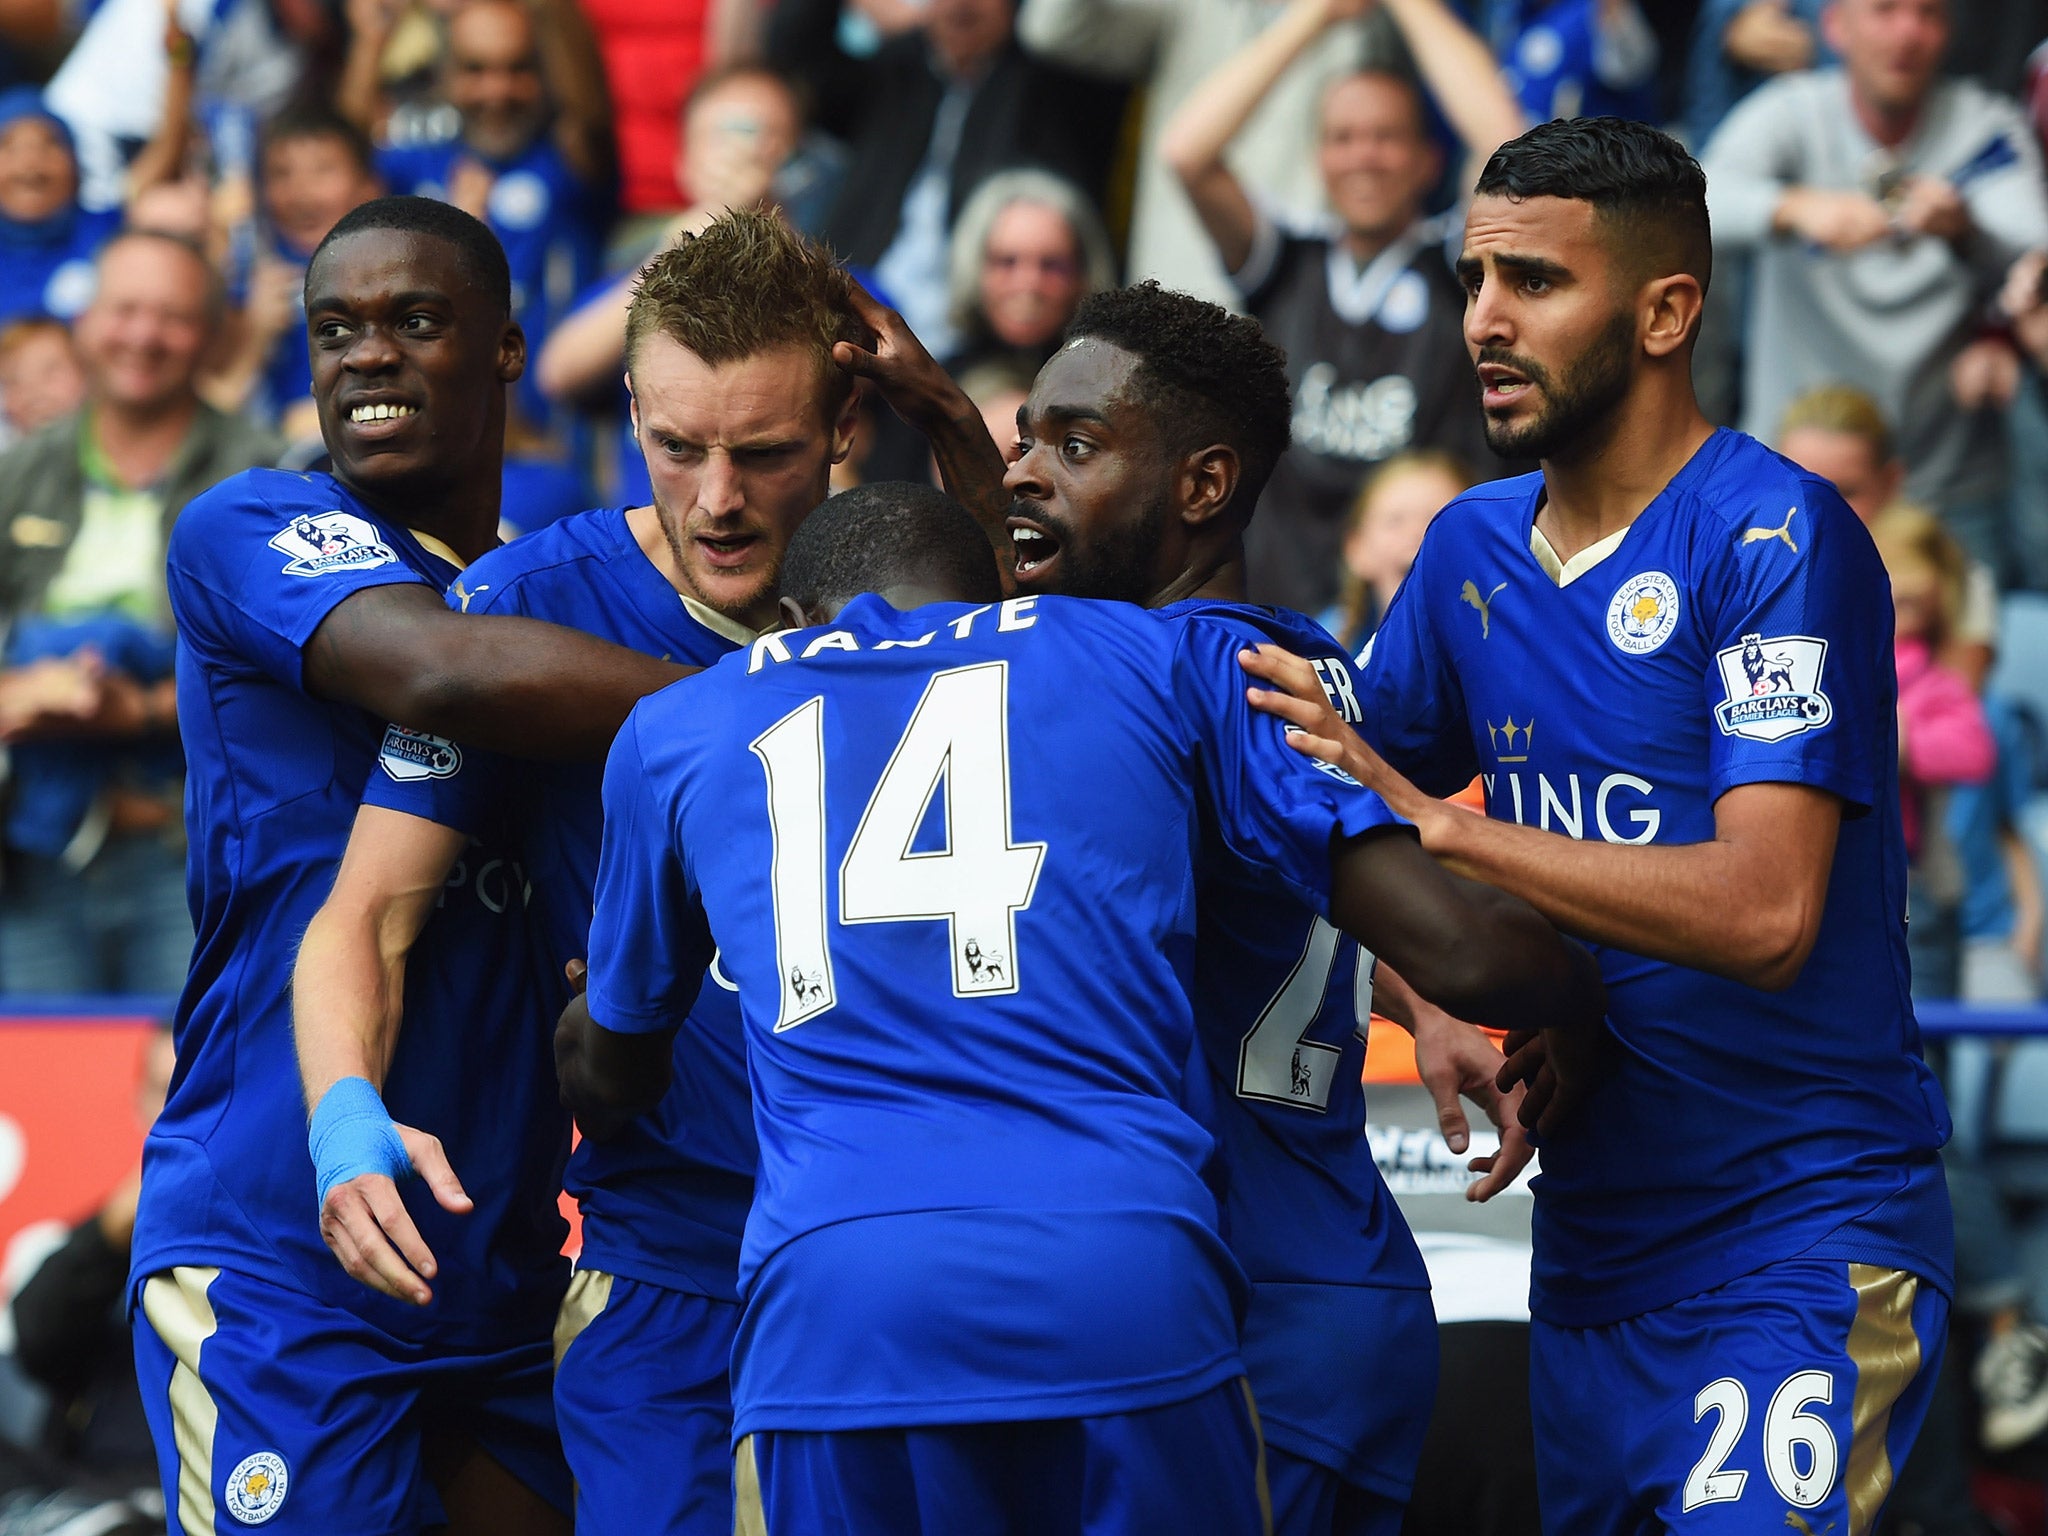 Leicester face Arsenal in the Premier League